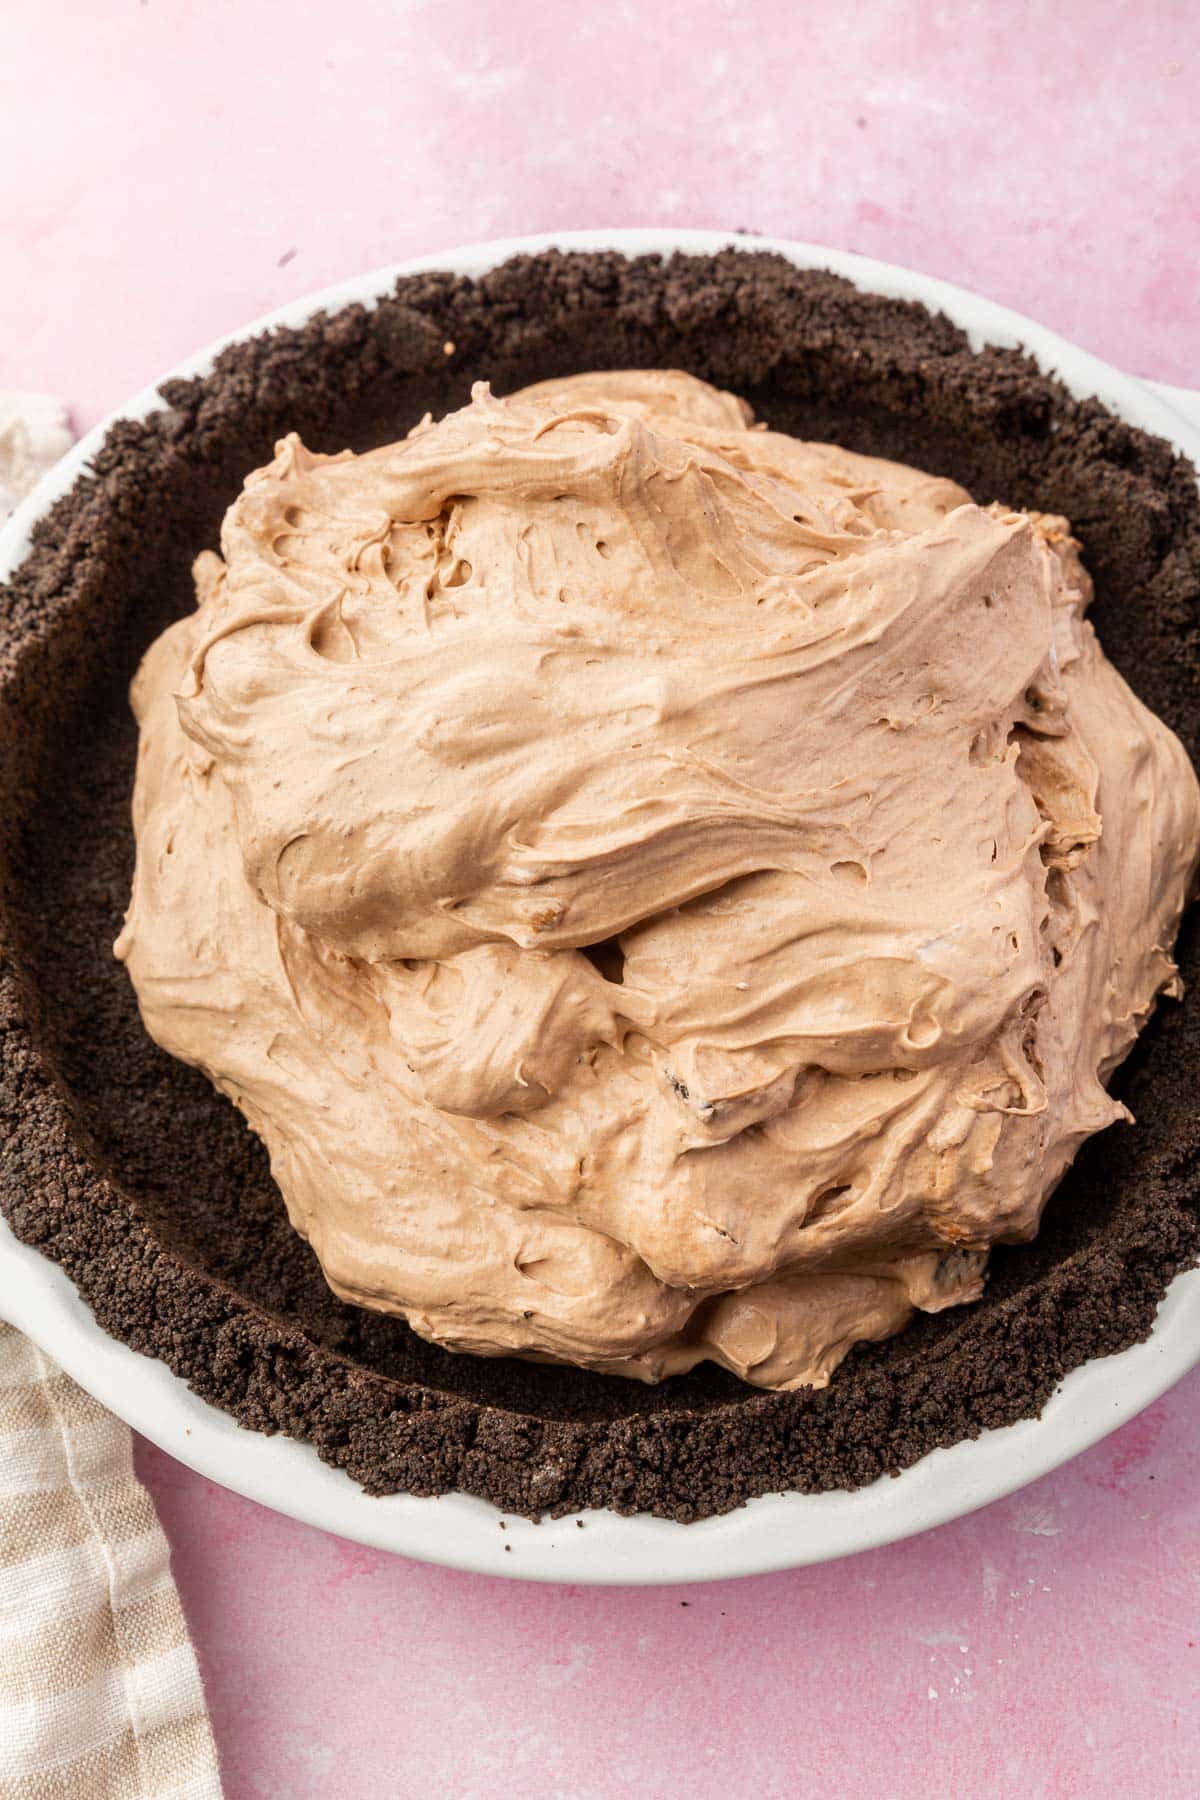 A chocolate whipped pudding mixture in an Oreo pie crust.